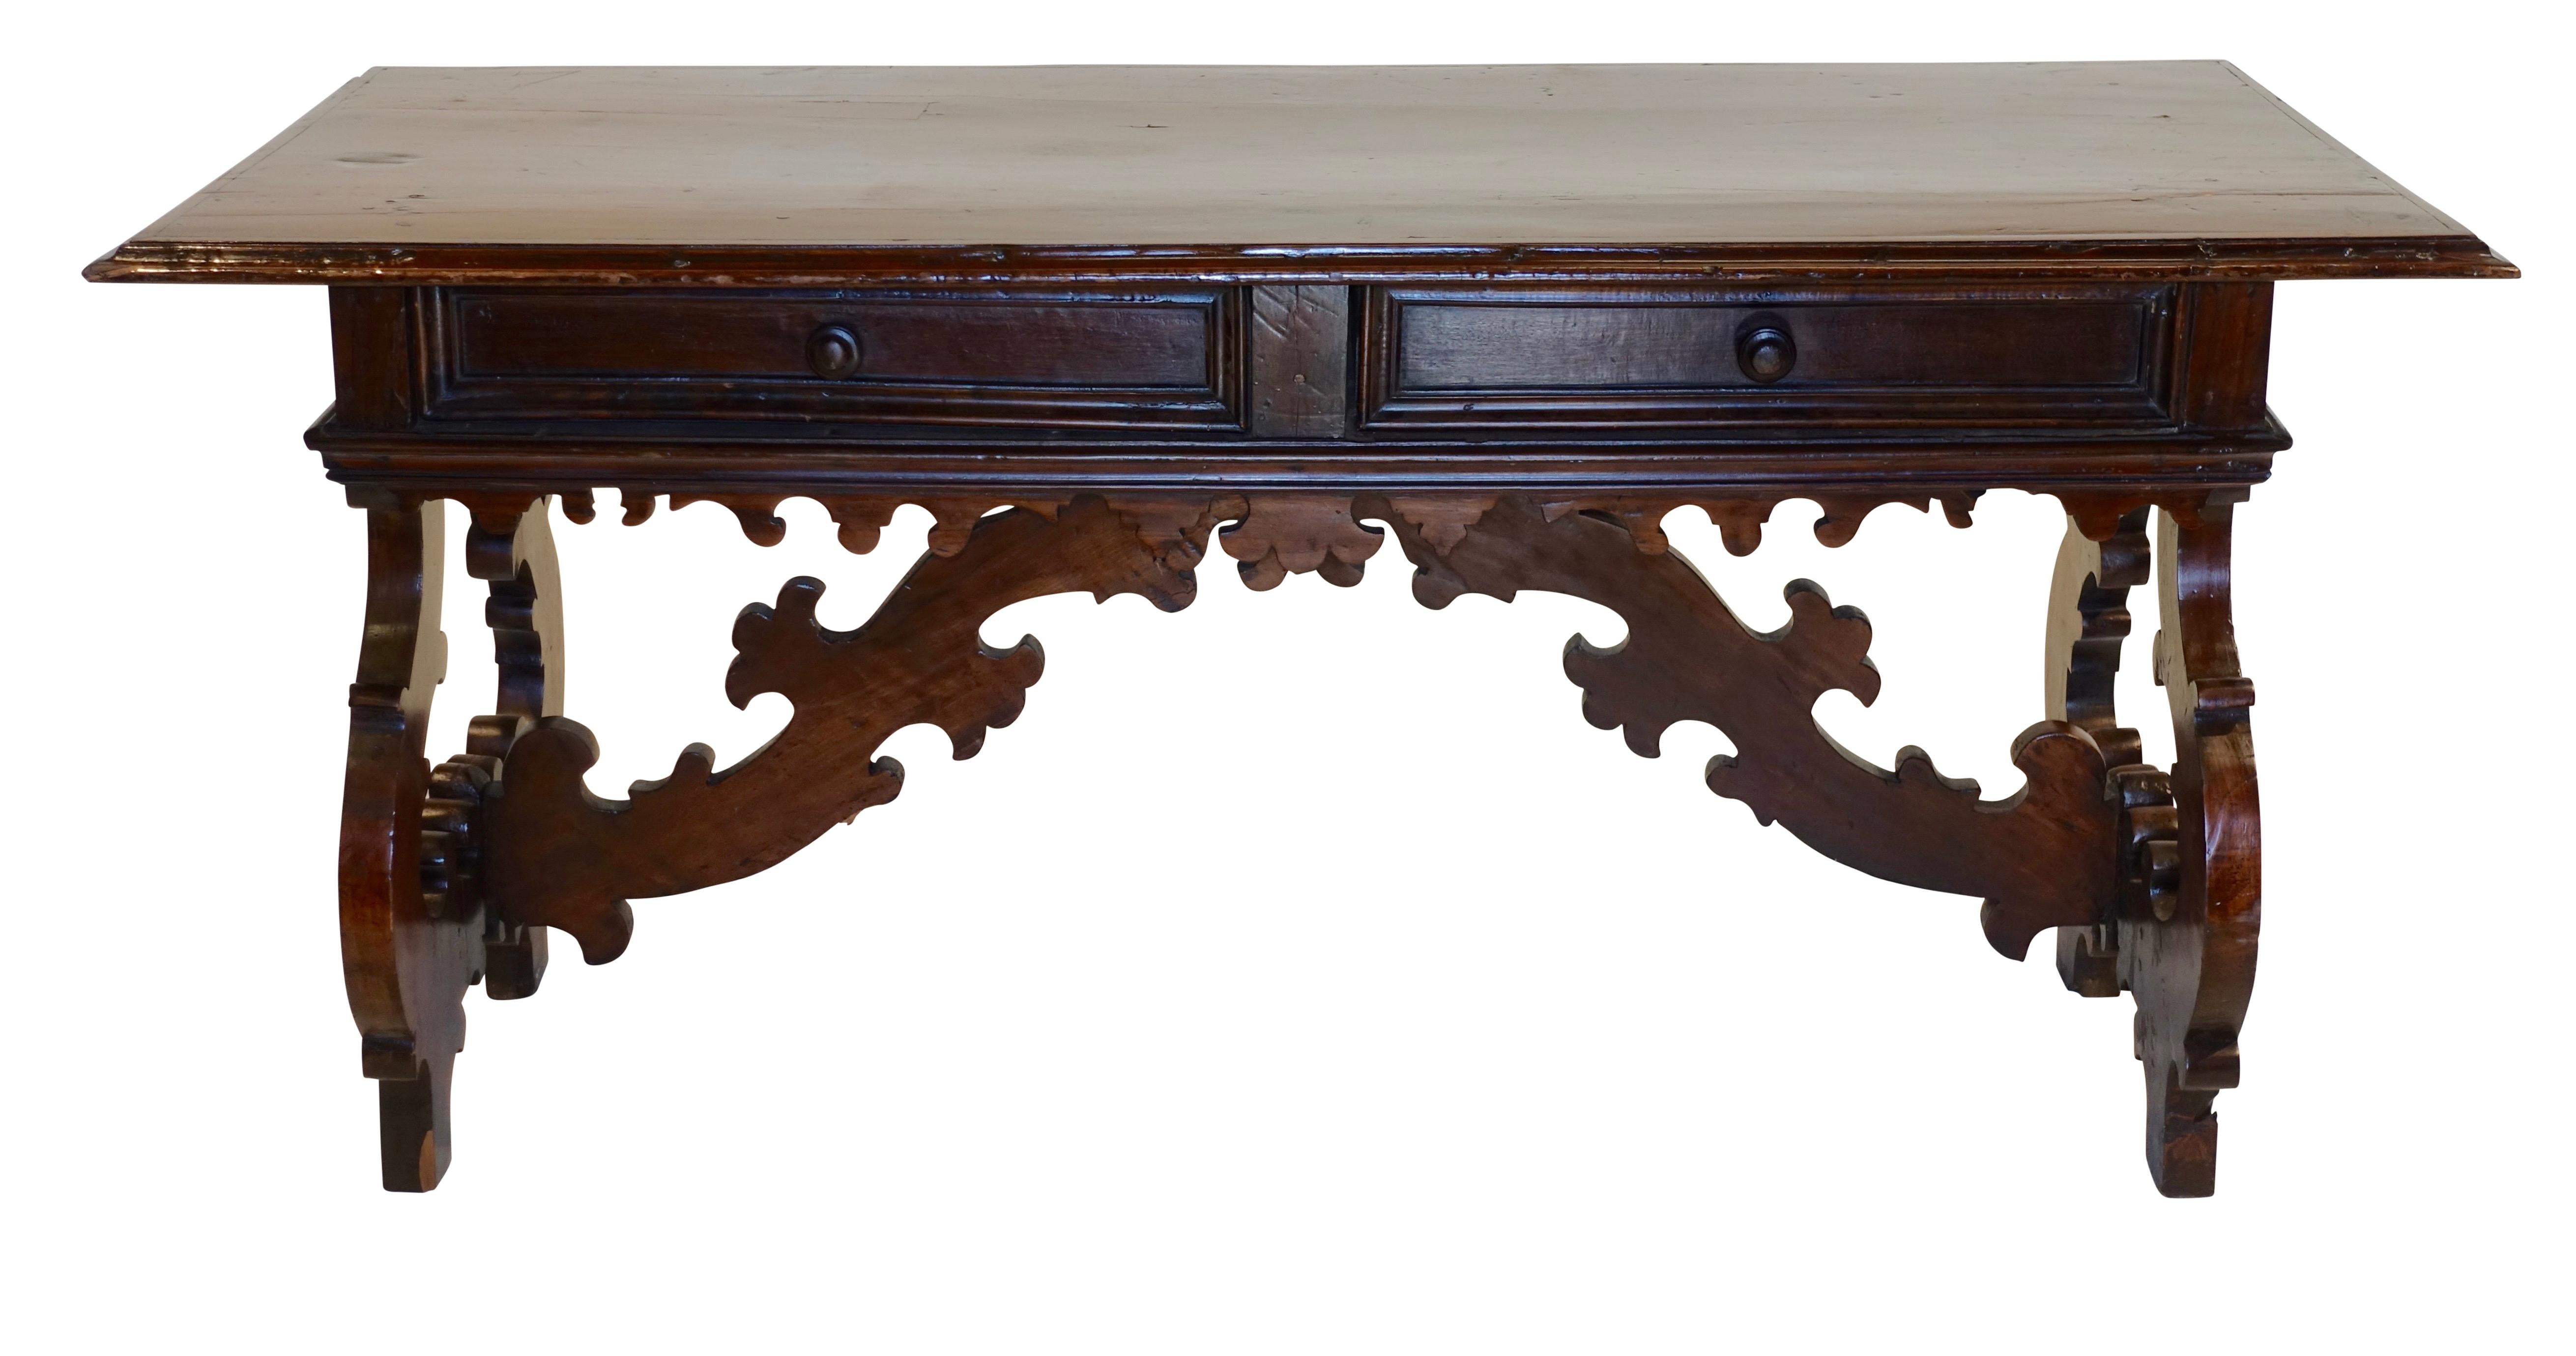 An exuberant library table or desk having a walnut molded edge around the top, two drawers, and fluidly carved legs and support braces. Spanish, 18th century.

 